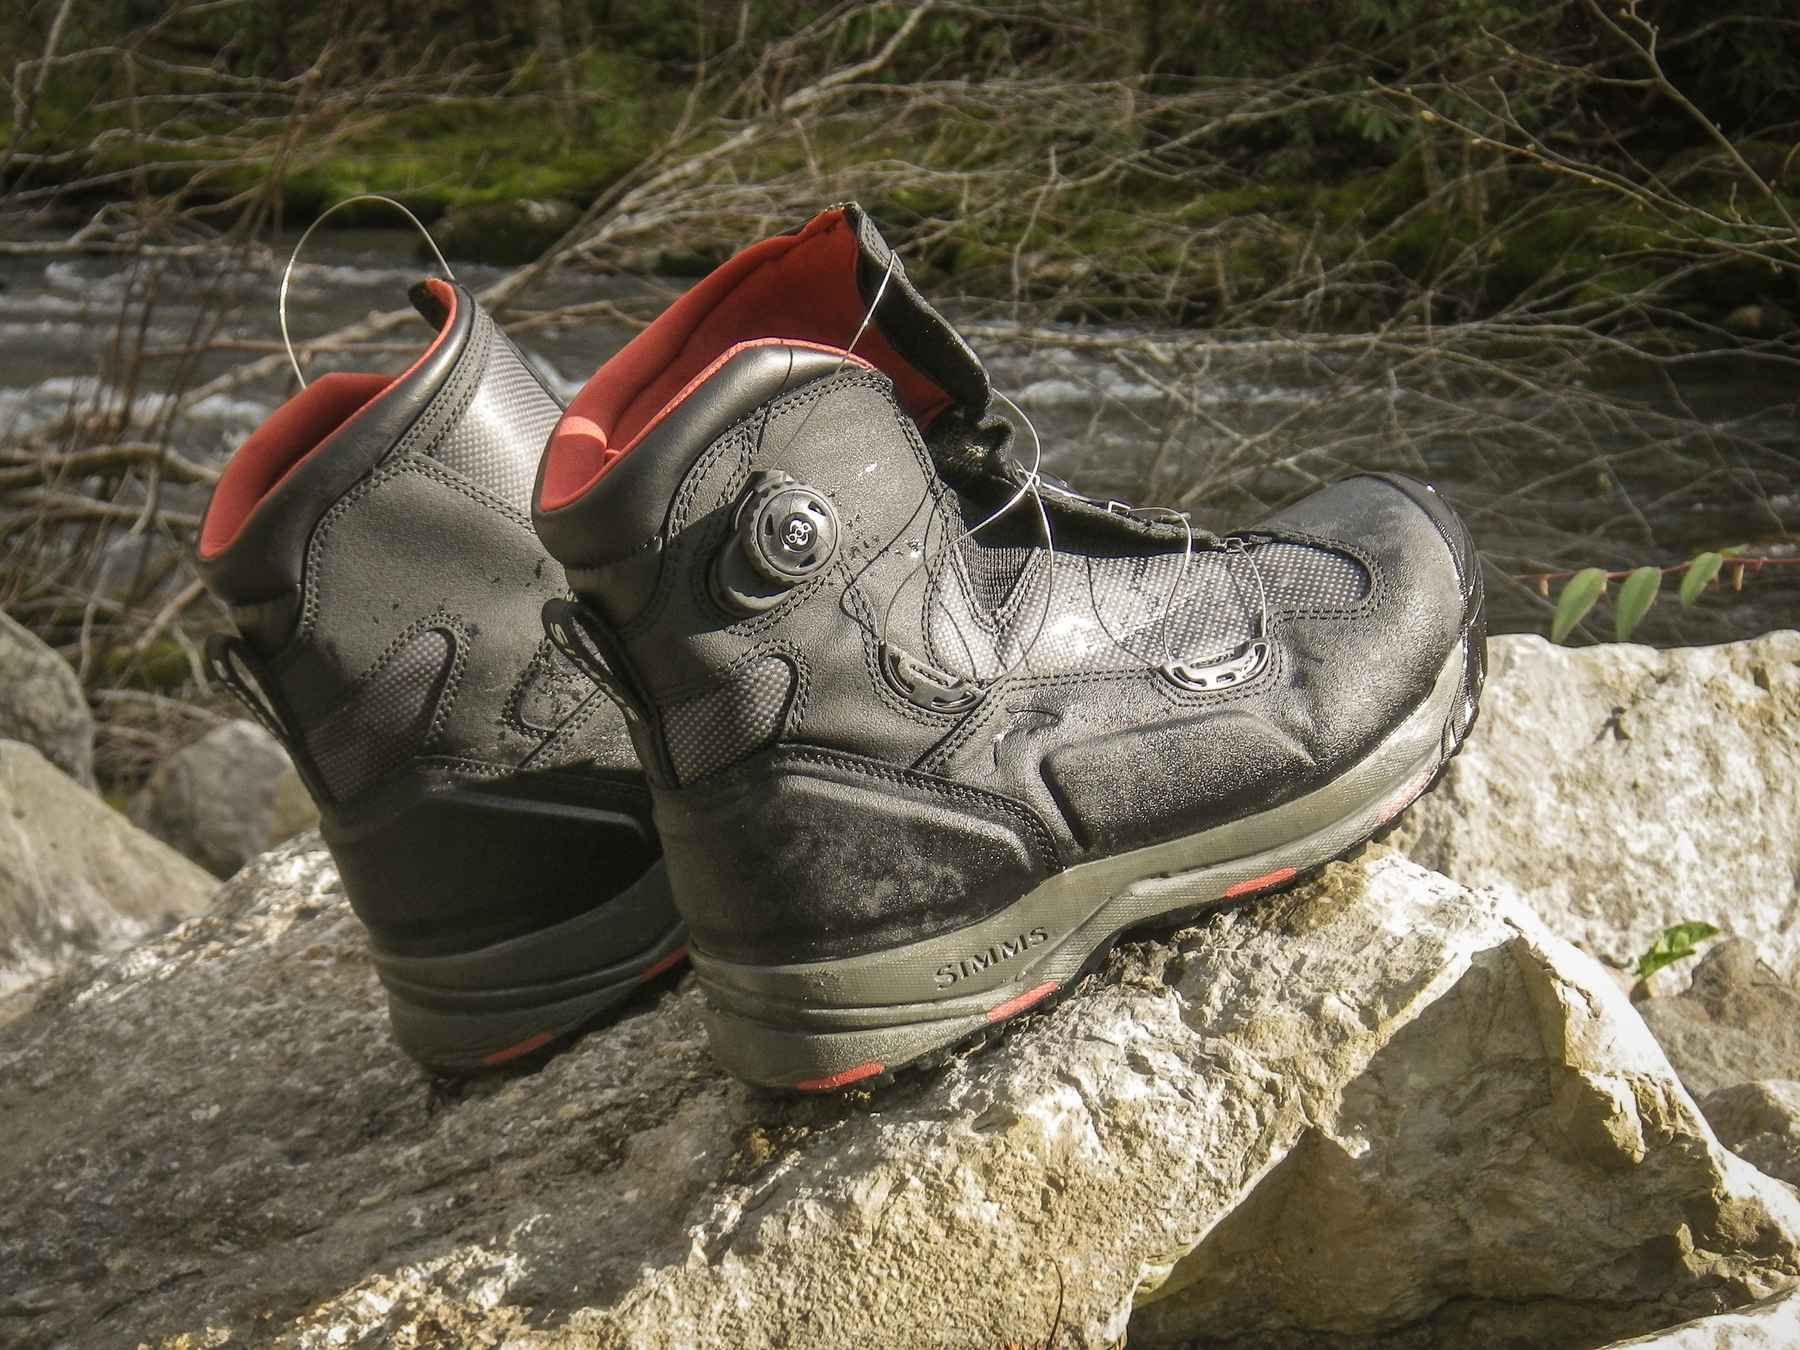 simms g4 guide boot